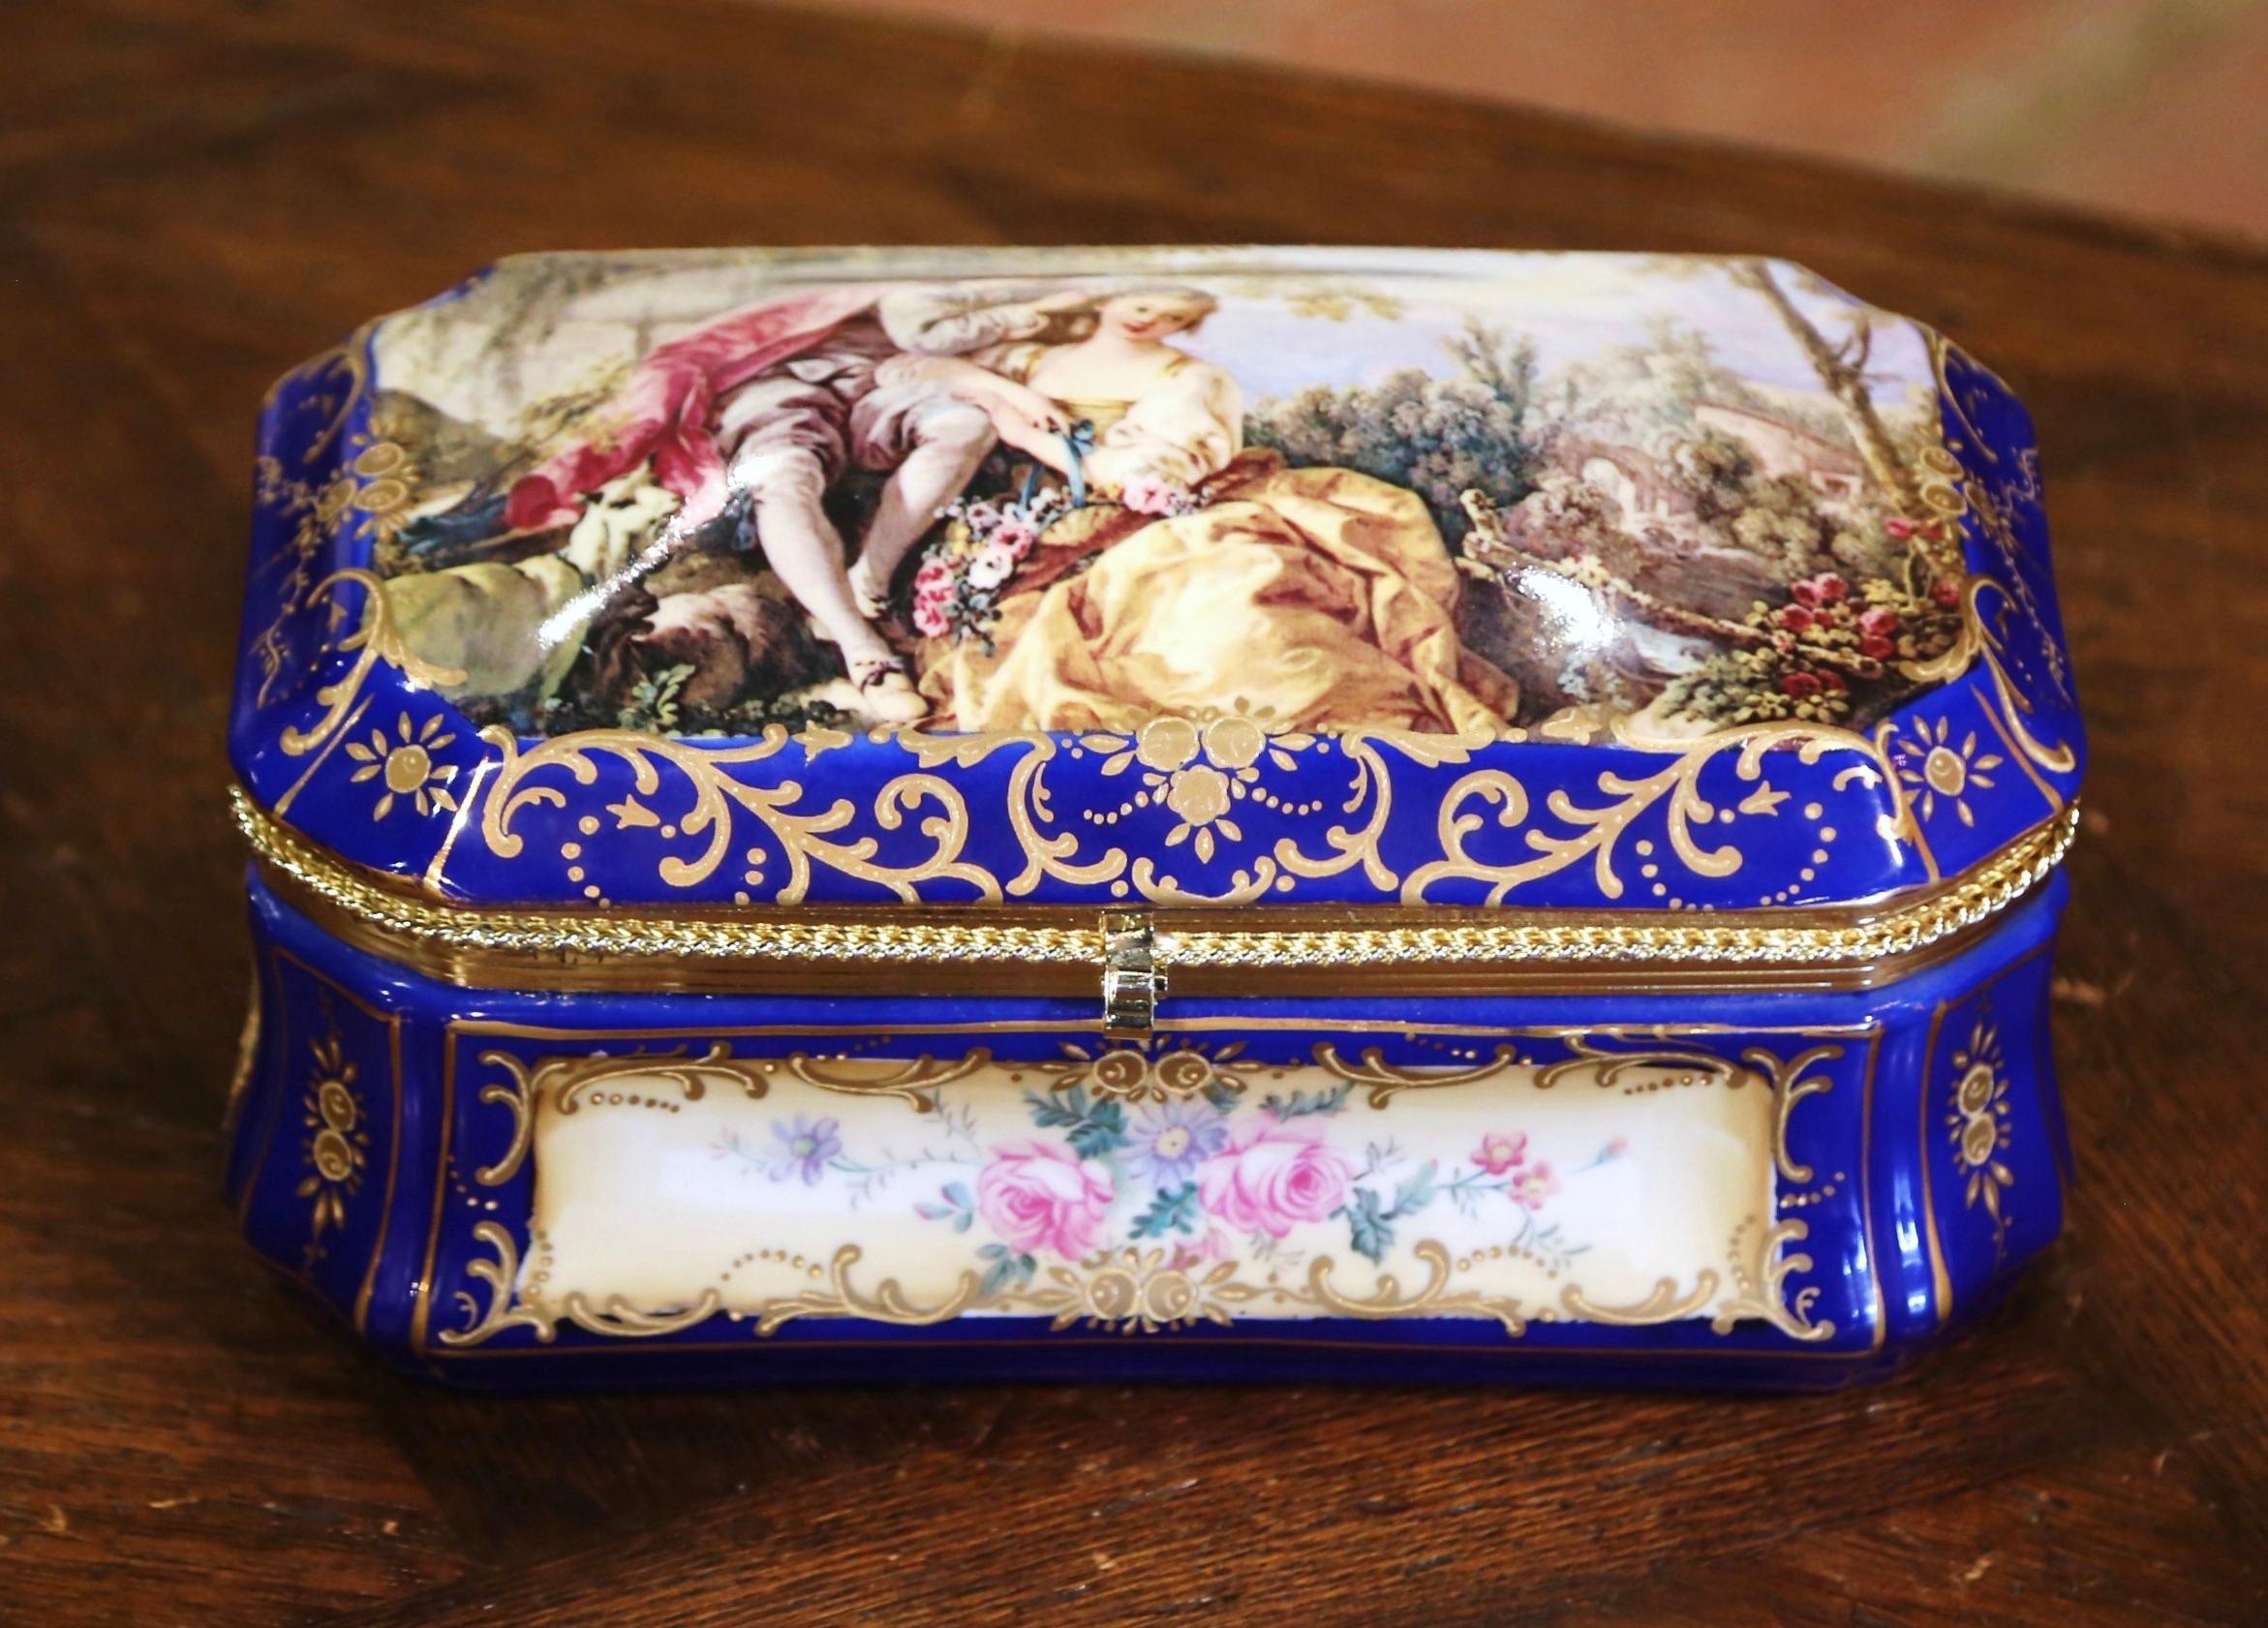 Decorate a master bathroom or powder room with this colorful antique jewelry box; crafted in the style of Sèvres, France circa 1870, the porcelain bombe casket with cobalt blue and gilt border, features a hand painted pastoral scene after Francois